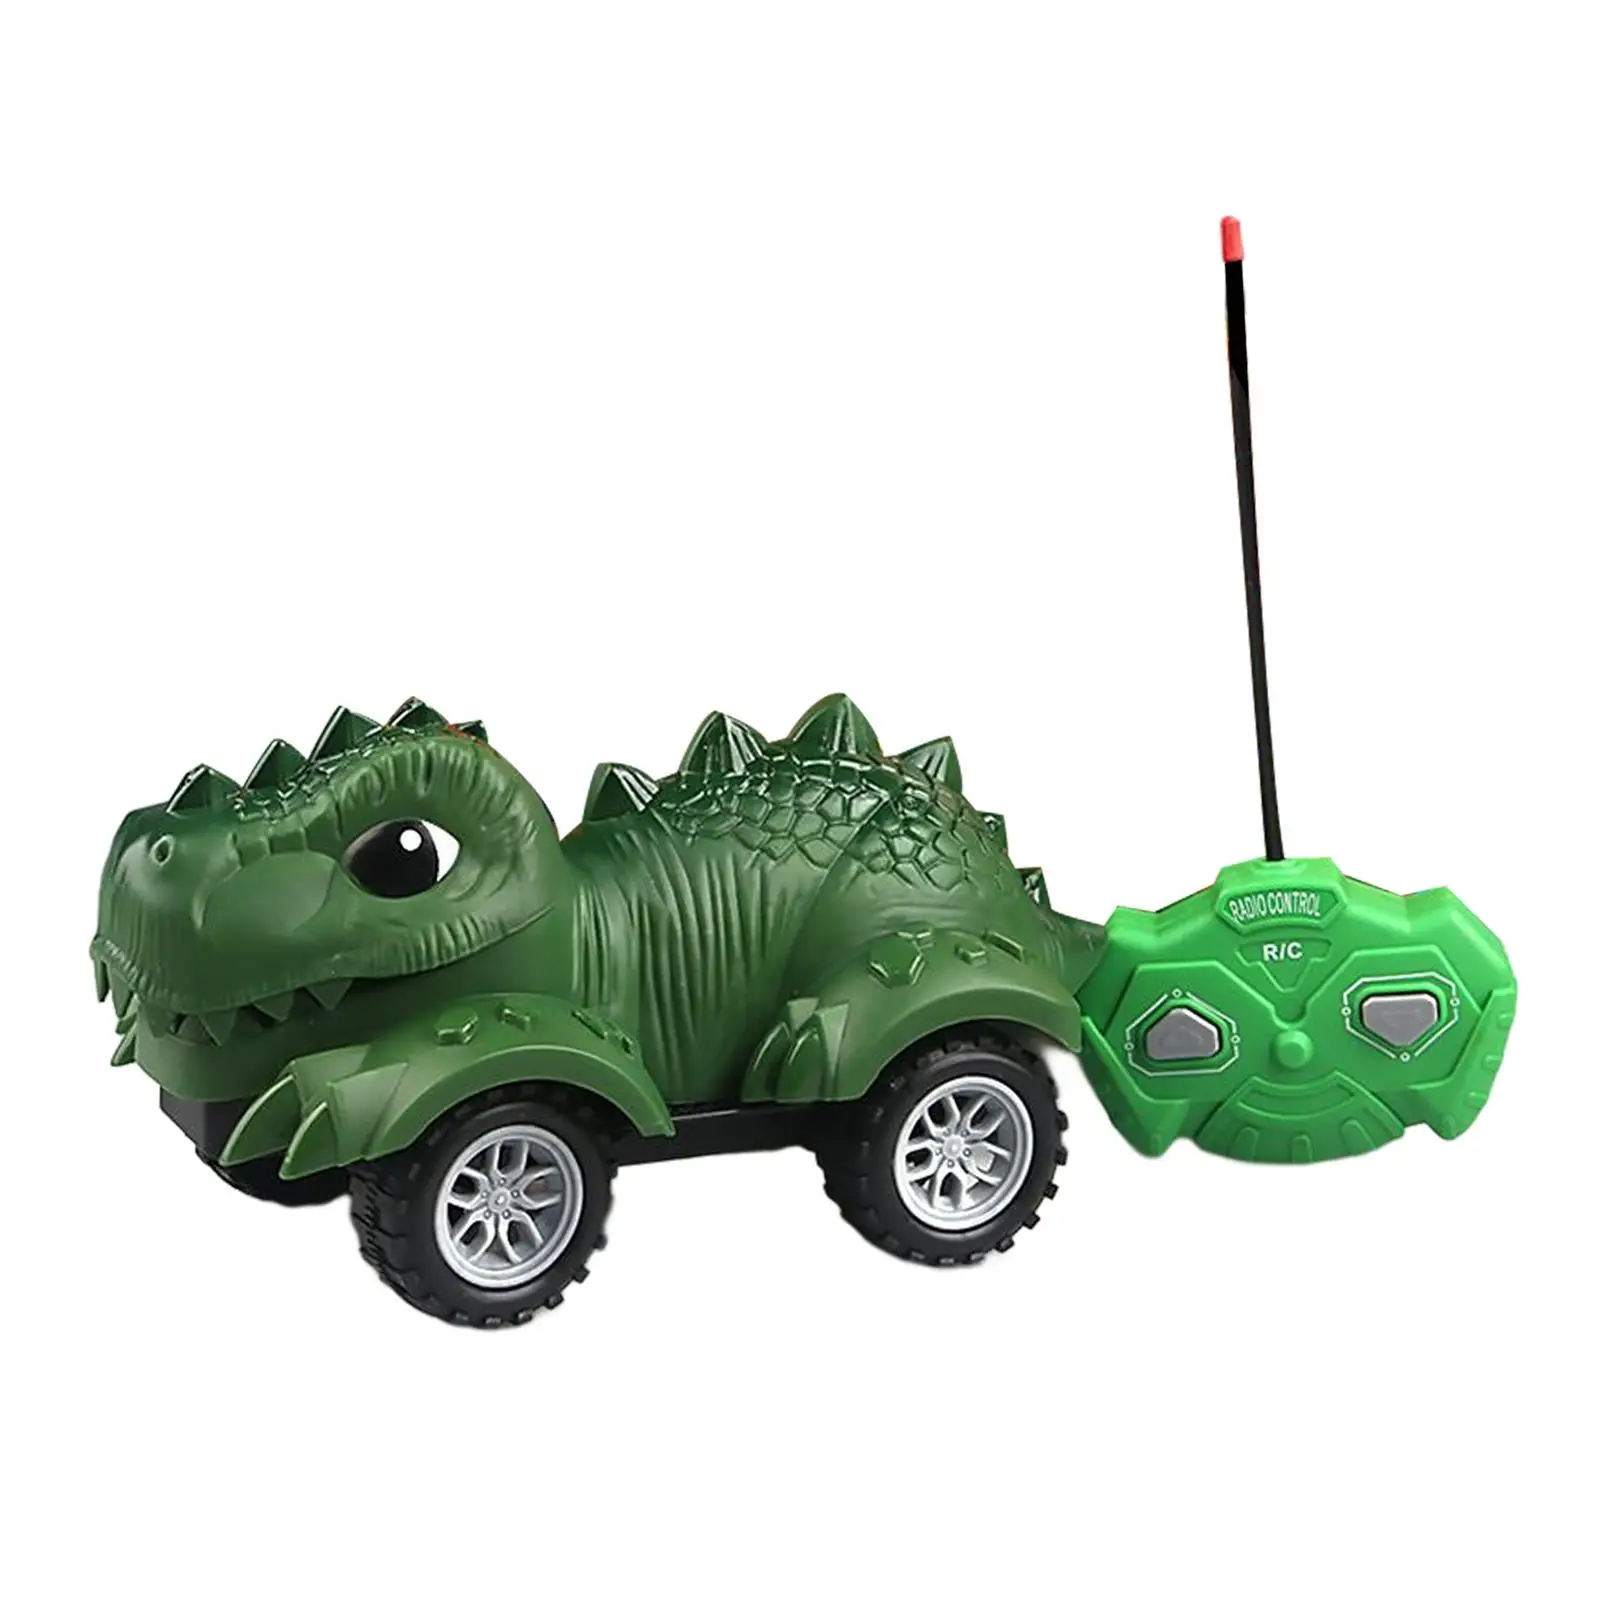 Dinosaur Car Toys Battery Operated Toy Car for Christmas Gifts Toddler Toys Boys